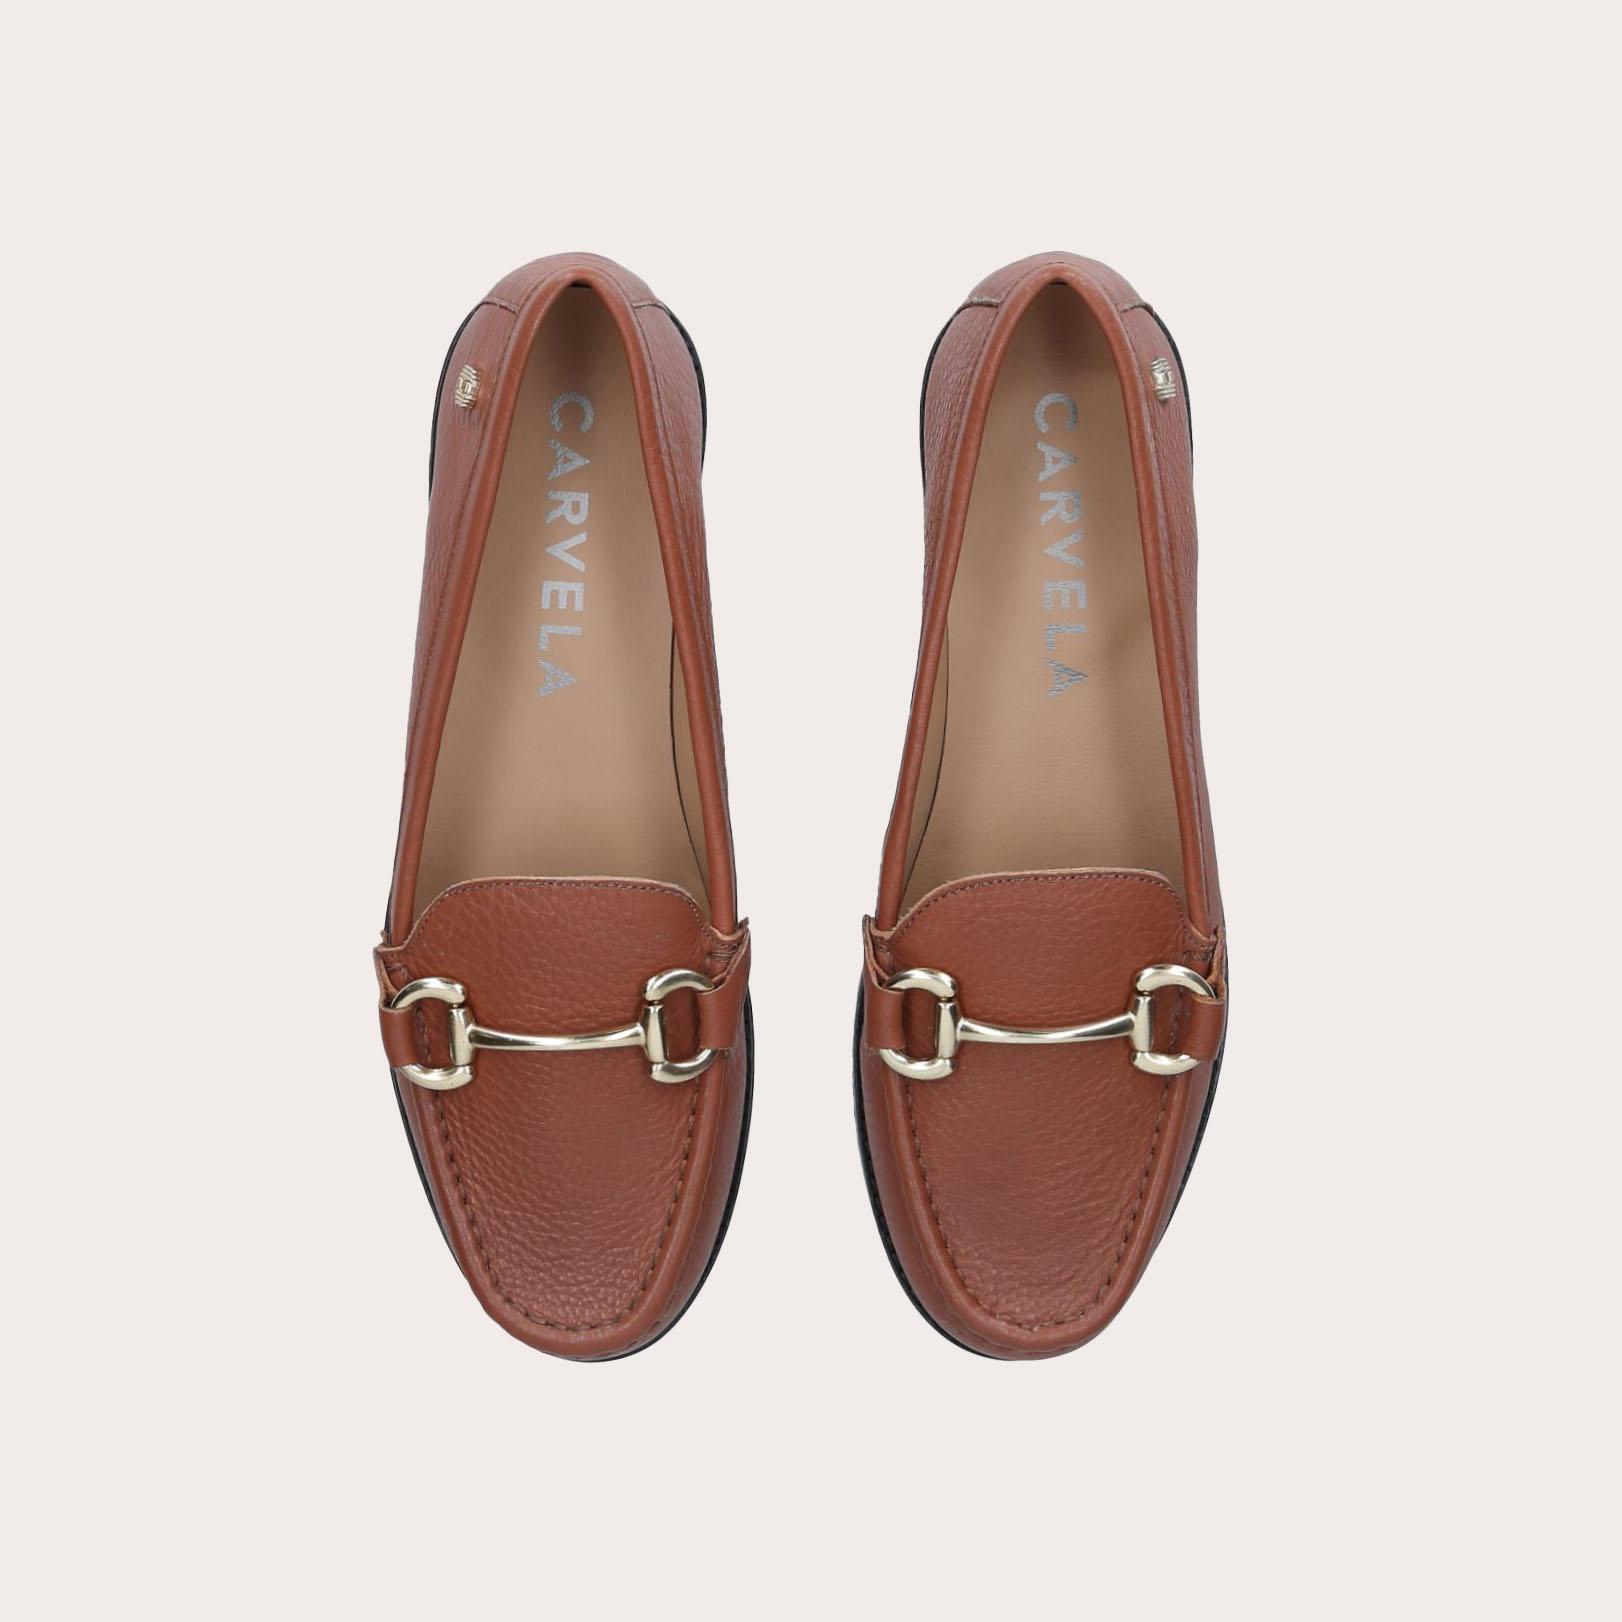 SNAP Brown Tan Leather Slip On Loafers by CARVELA COMFORT